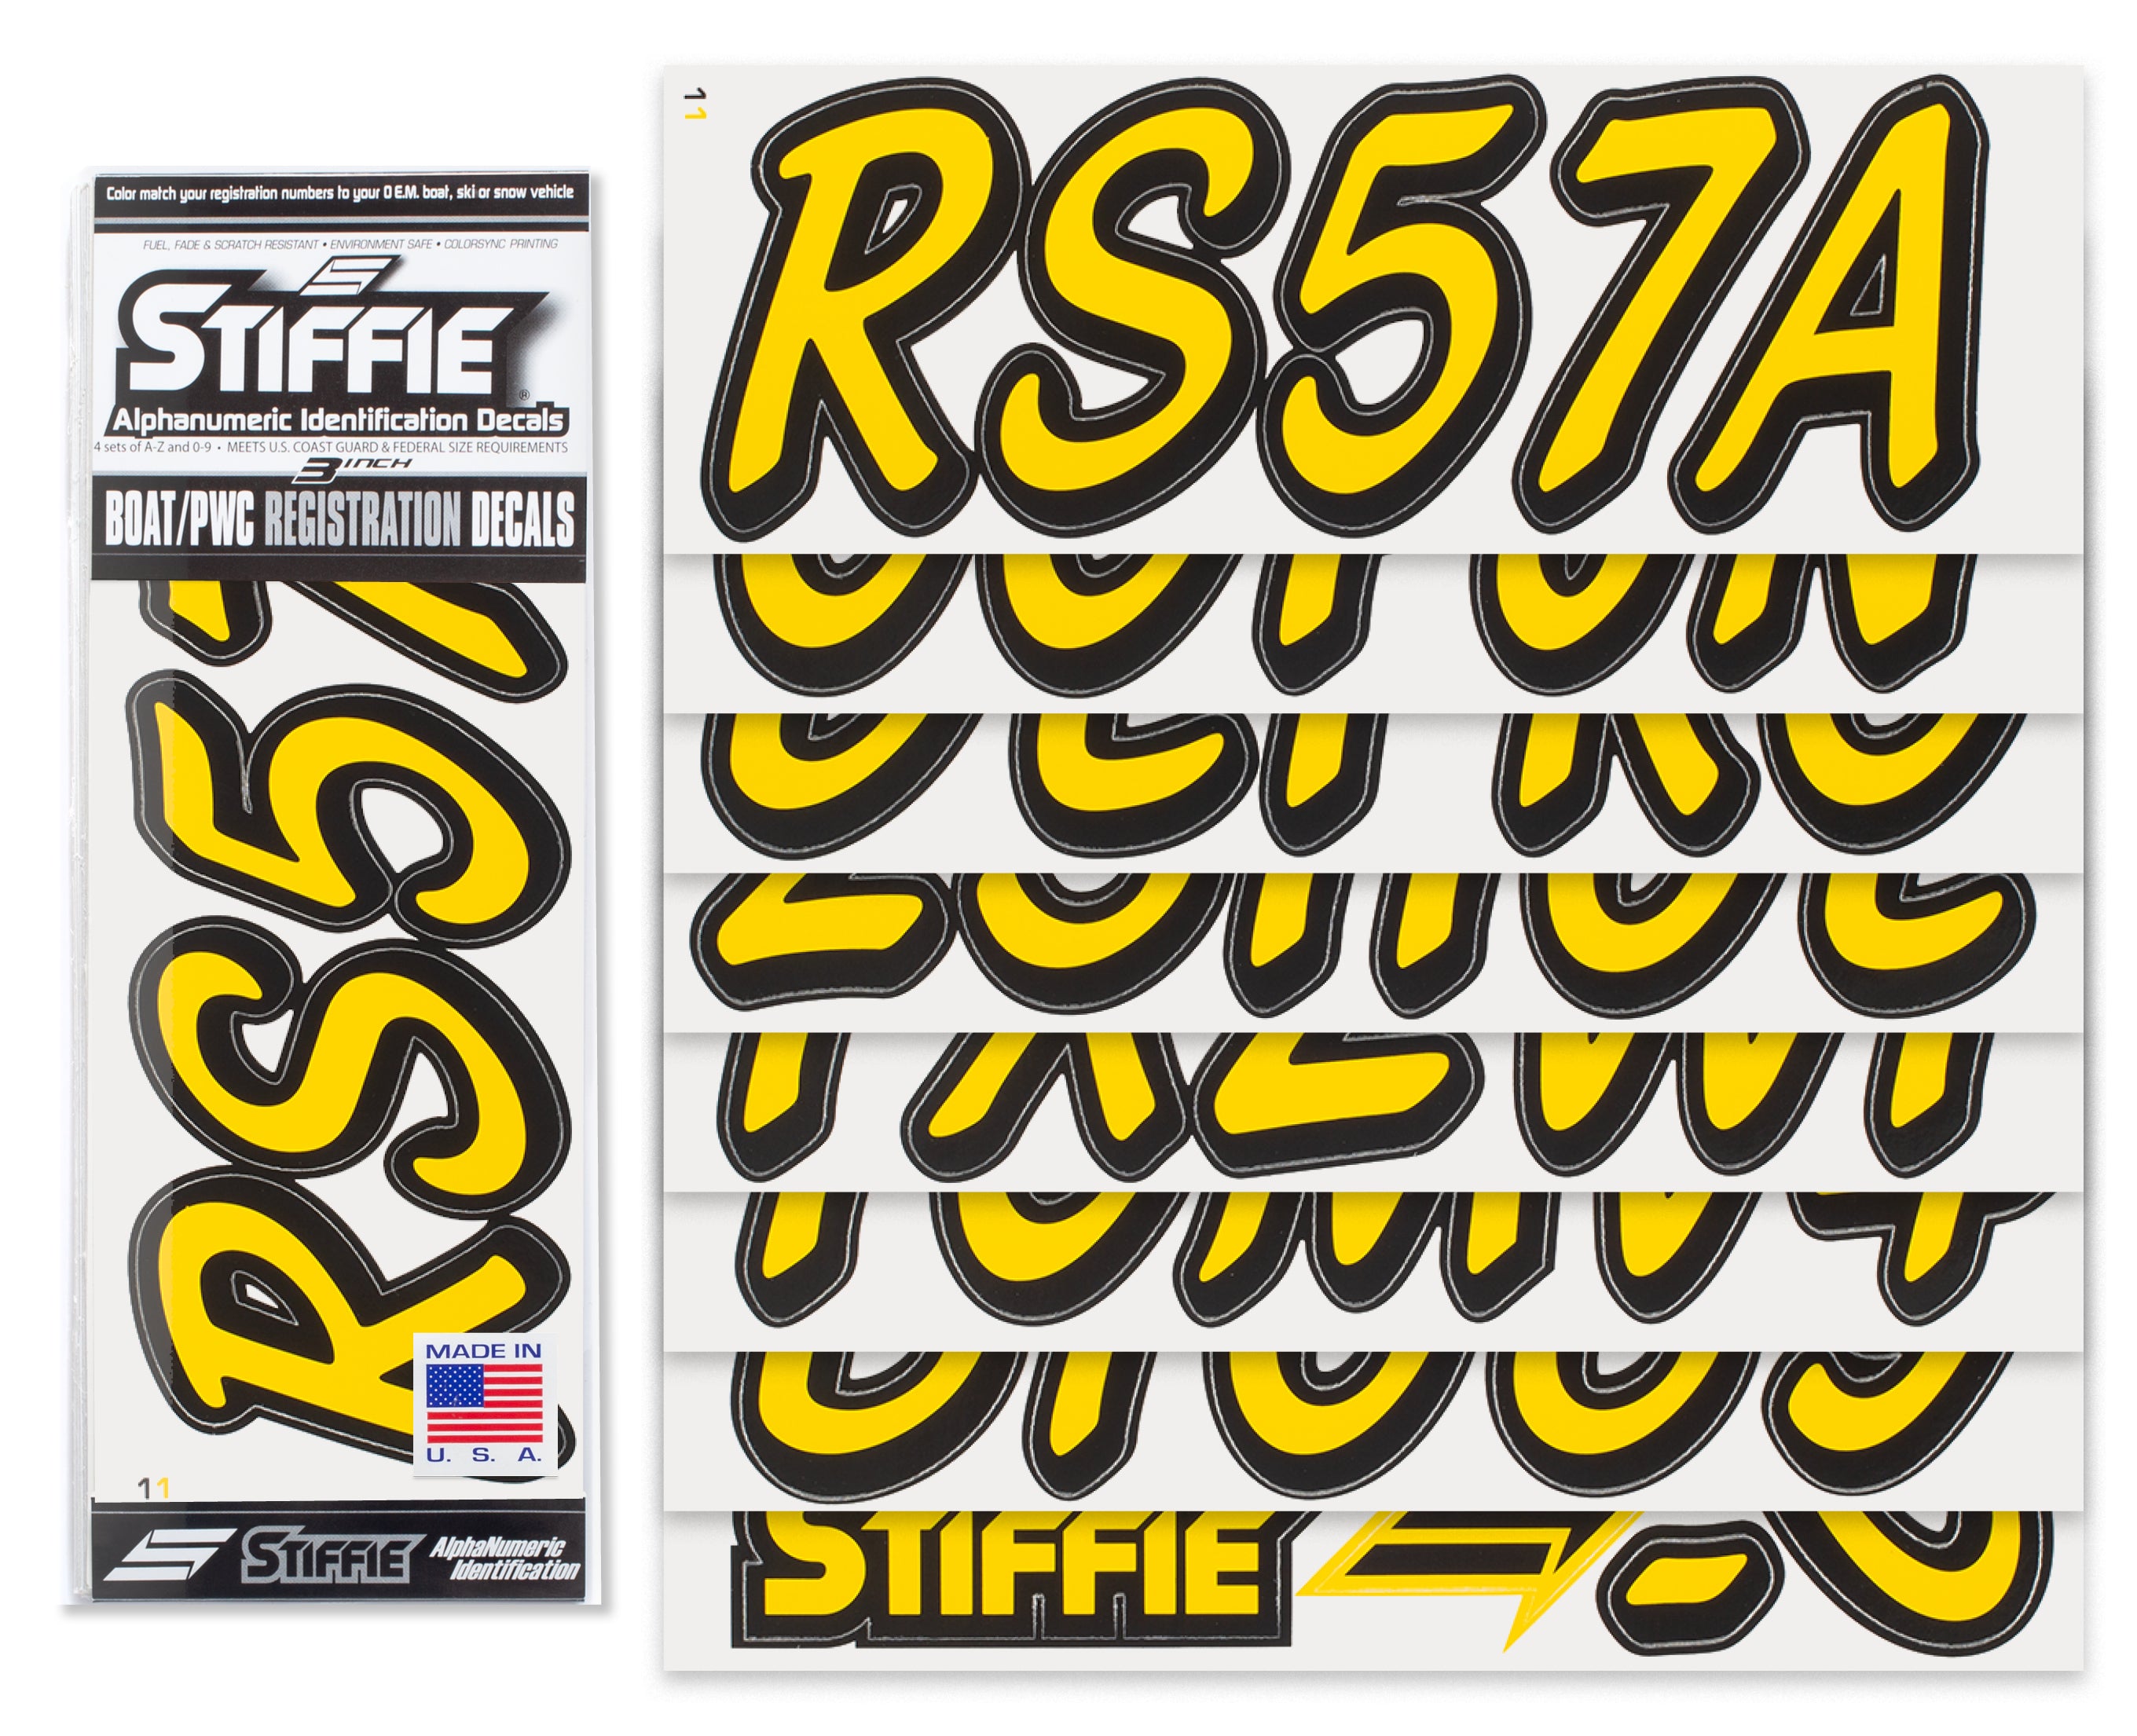 STIFFIE Whipline Solid Yellow/Black 3" Alpha-Numeric Registration Identification Numbers Stickers Decals for Boats & Personal Watercraft